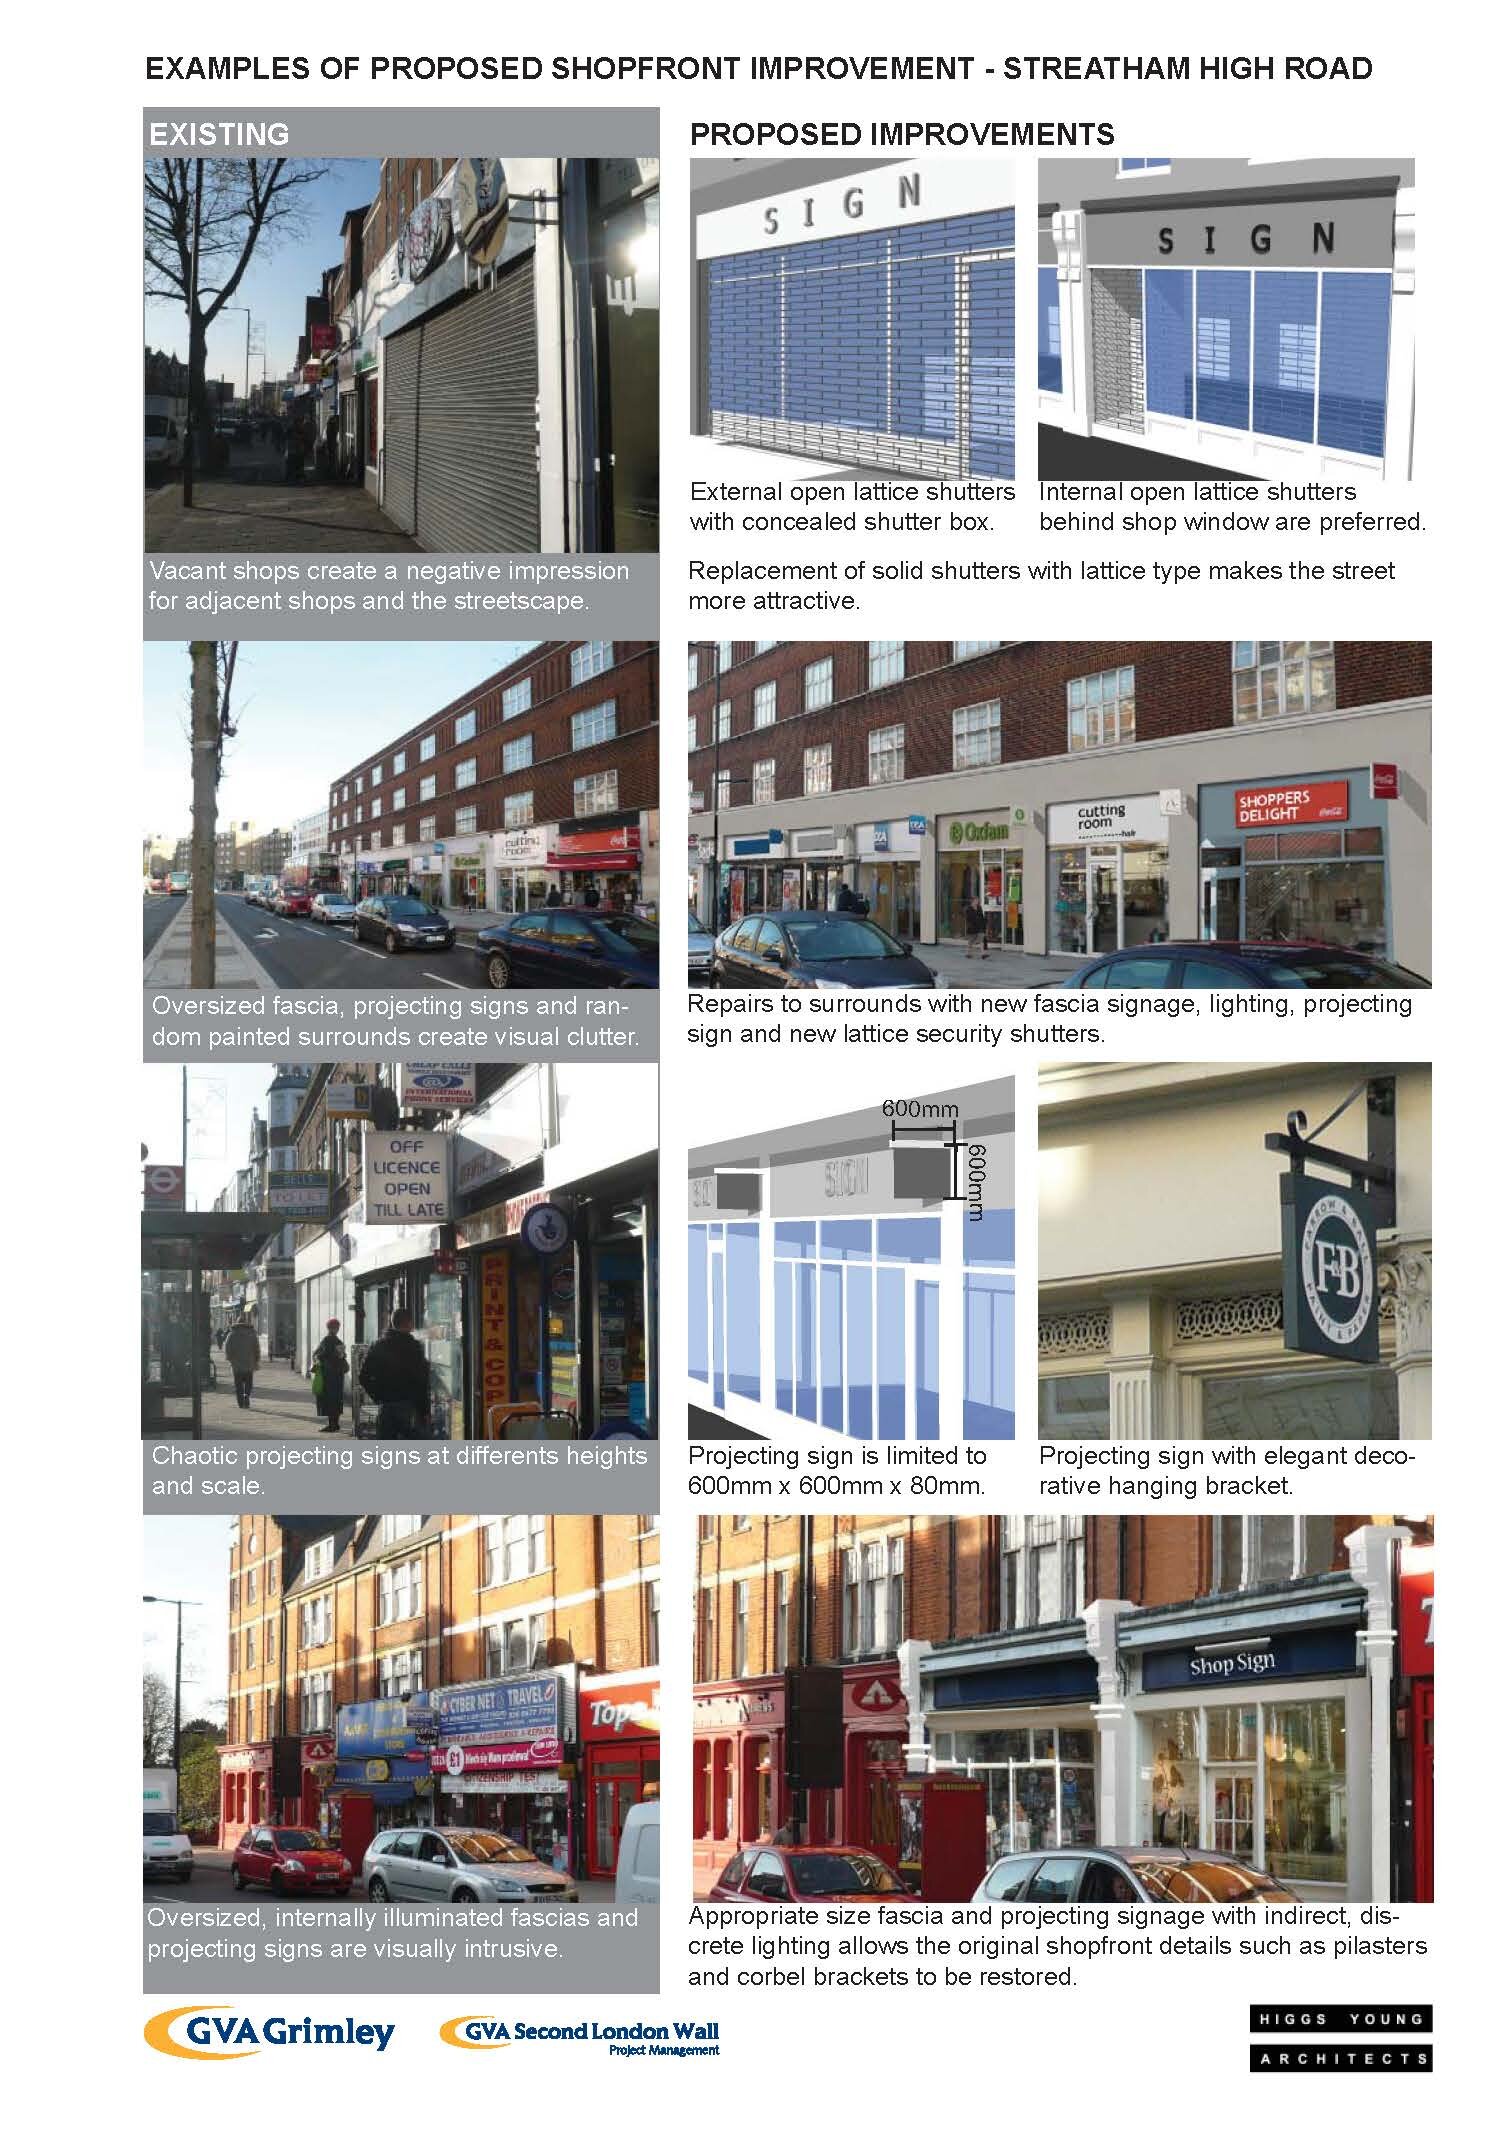 0986 Streatham and Norwood Improvement examples 22-10-10_Page_1.jpg